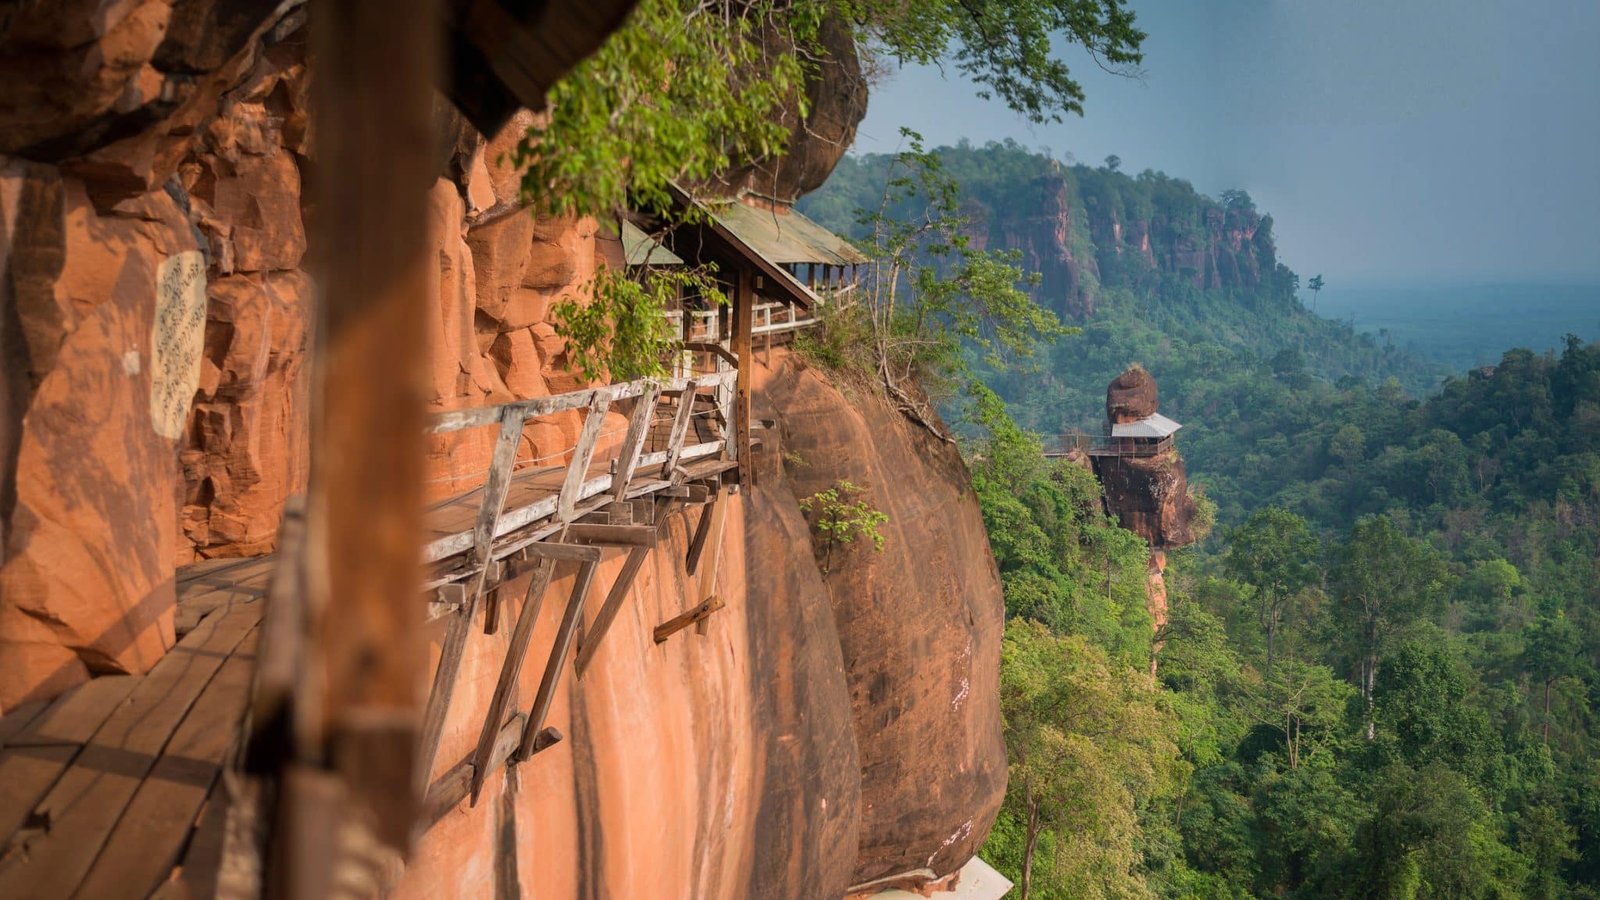 Wooden bridge and walkway attached to a red cliffside at Wat Phu tok mountain Bueng Kan, Thailand.